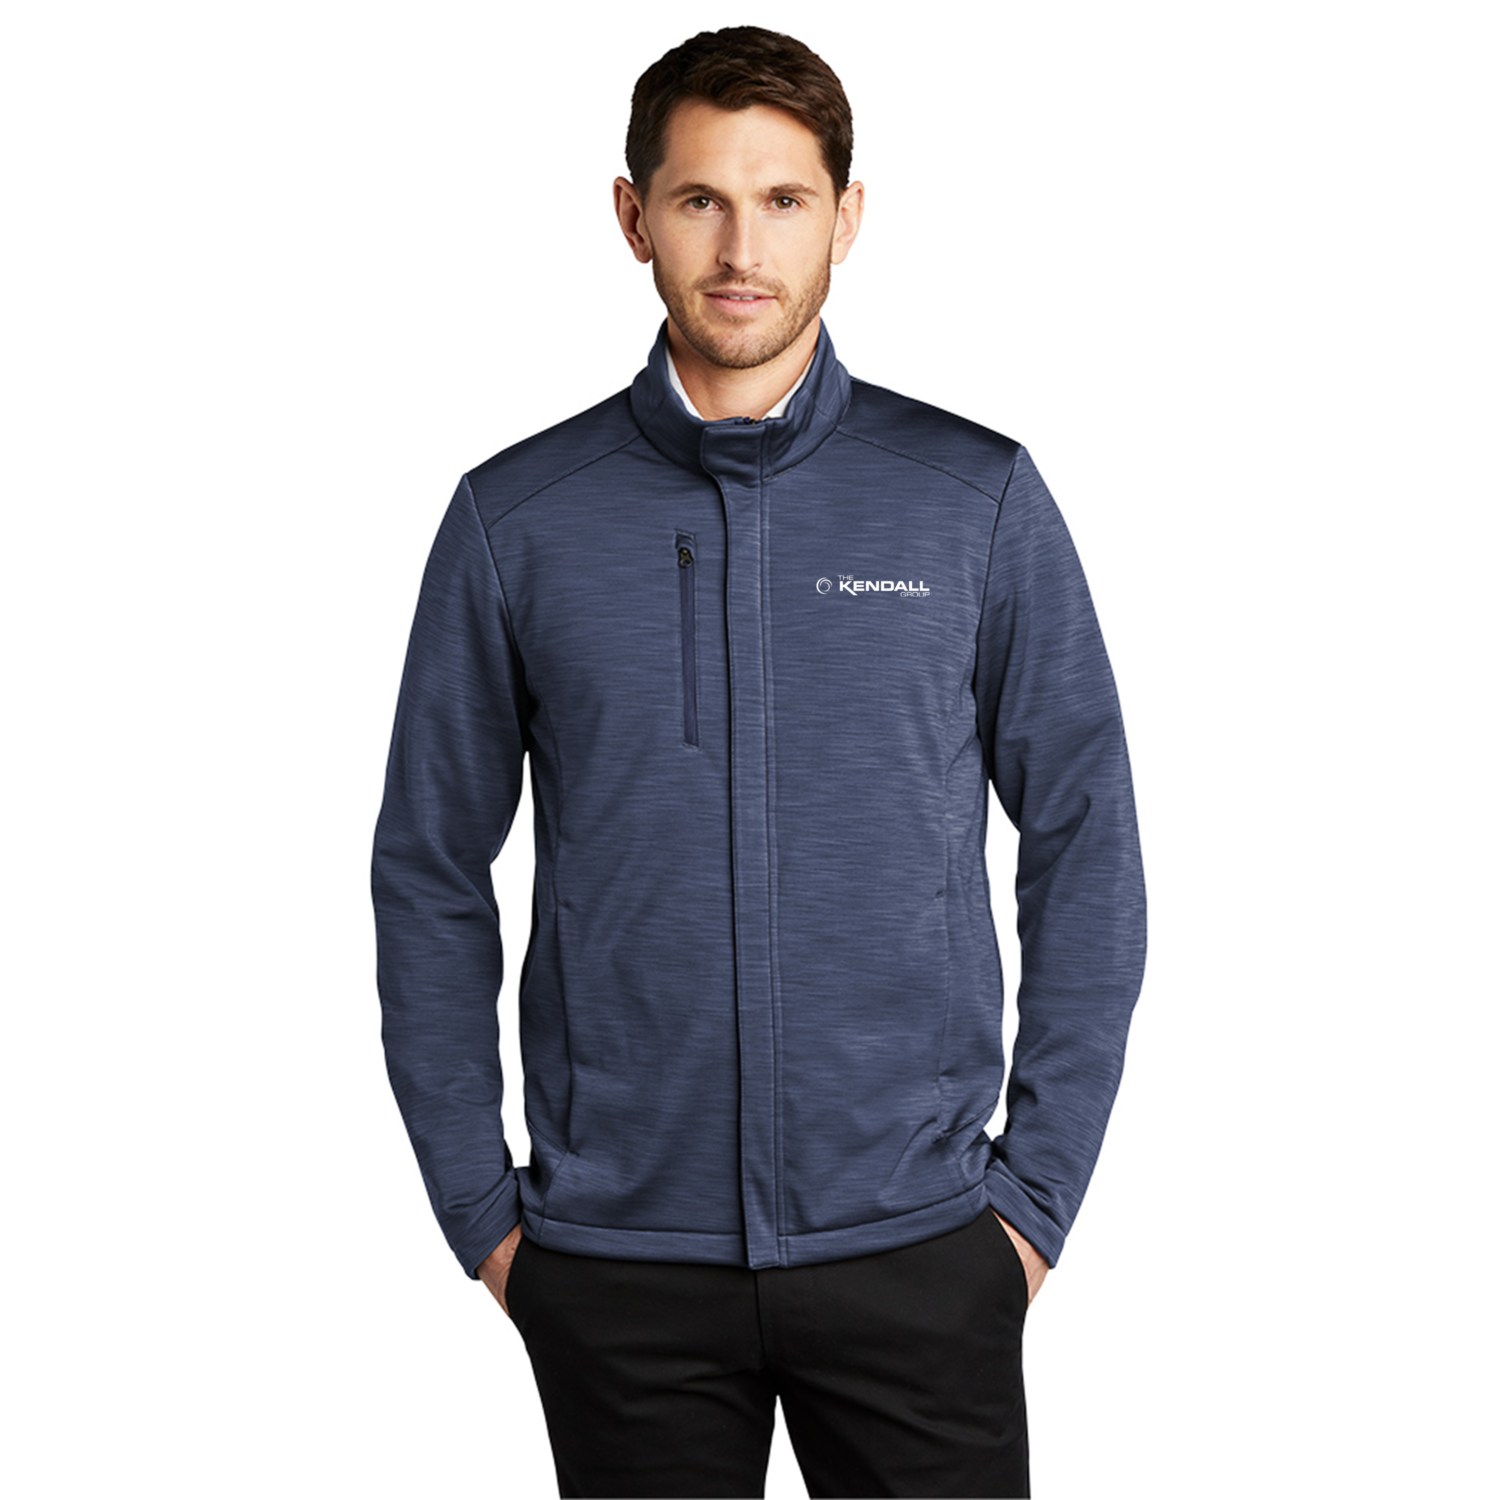 Stream Soft Shell Jacket – The Kendall Group